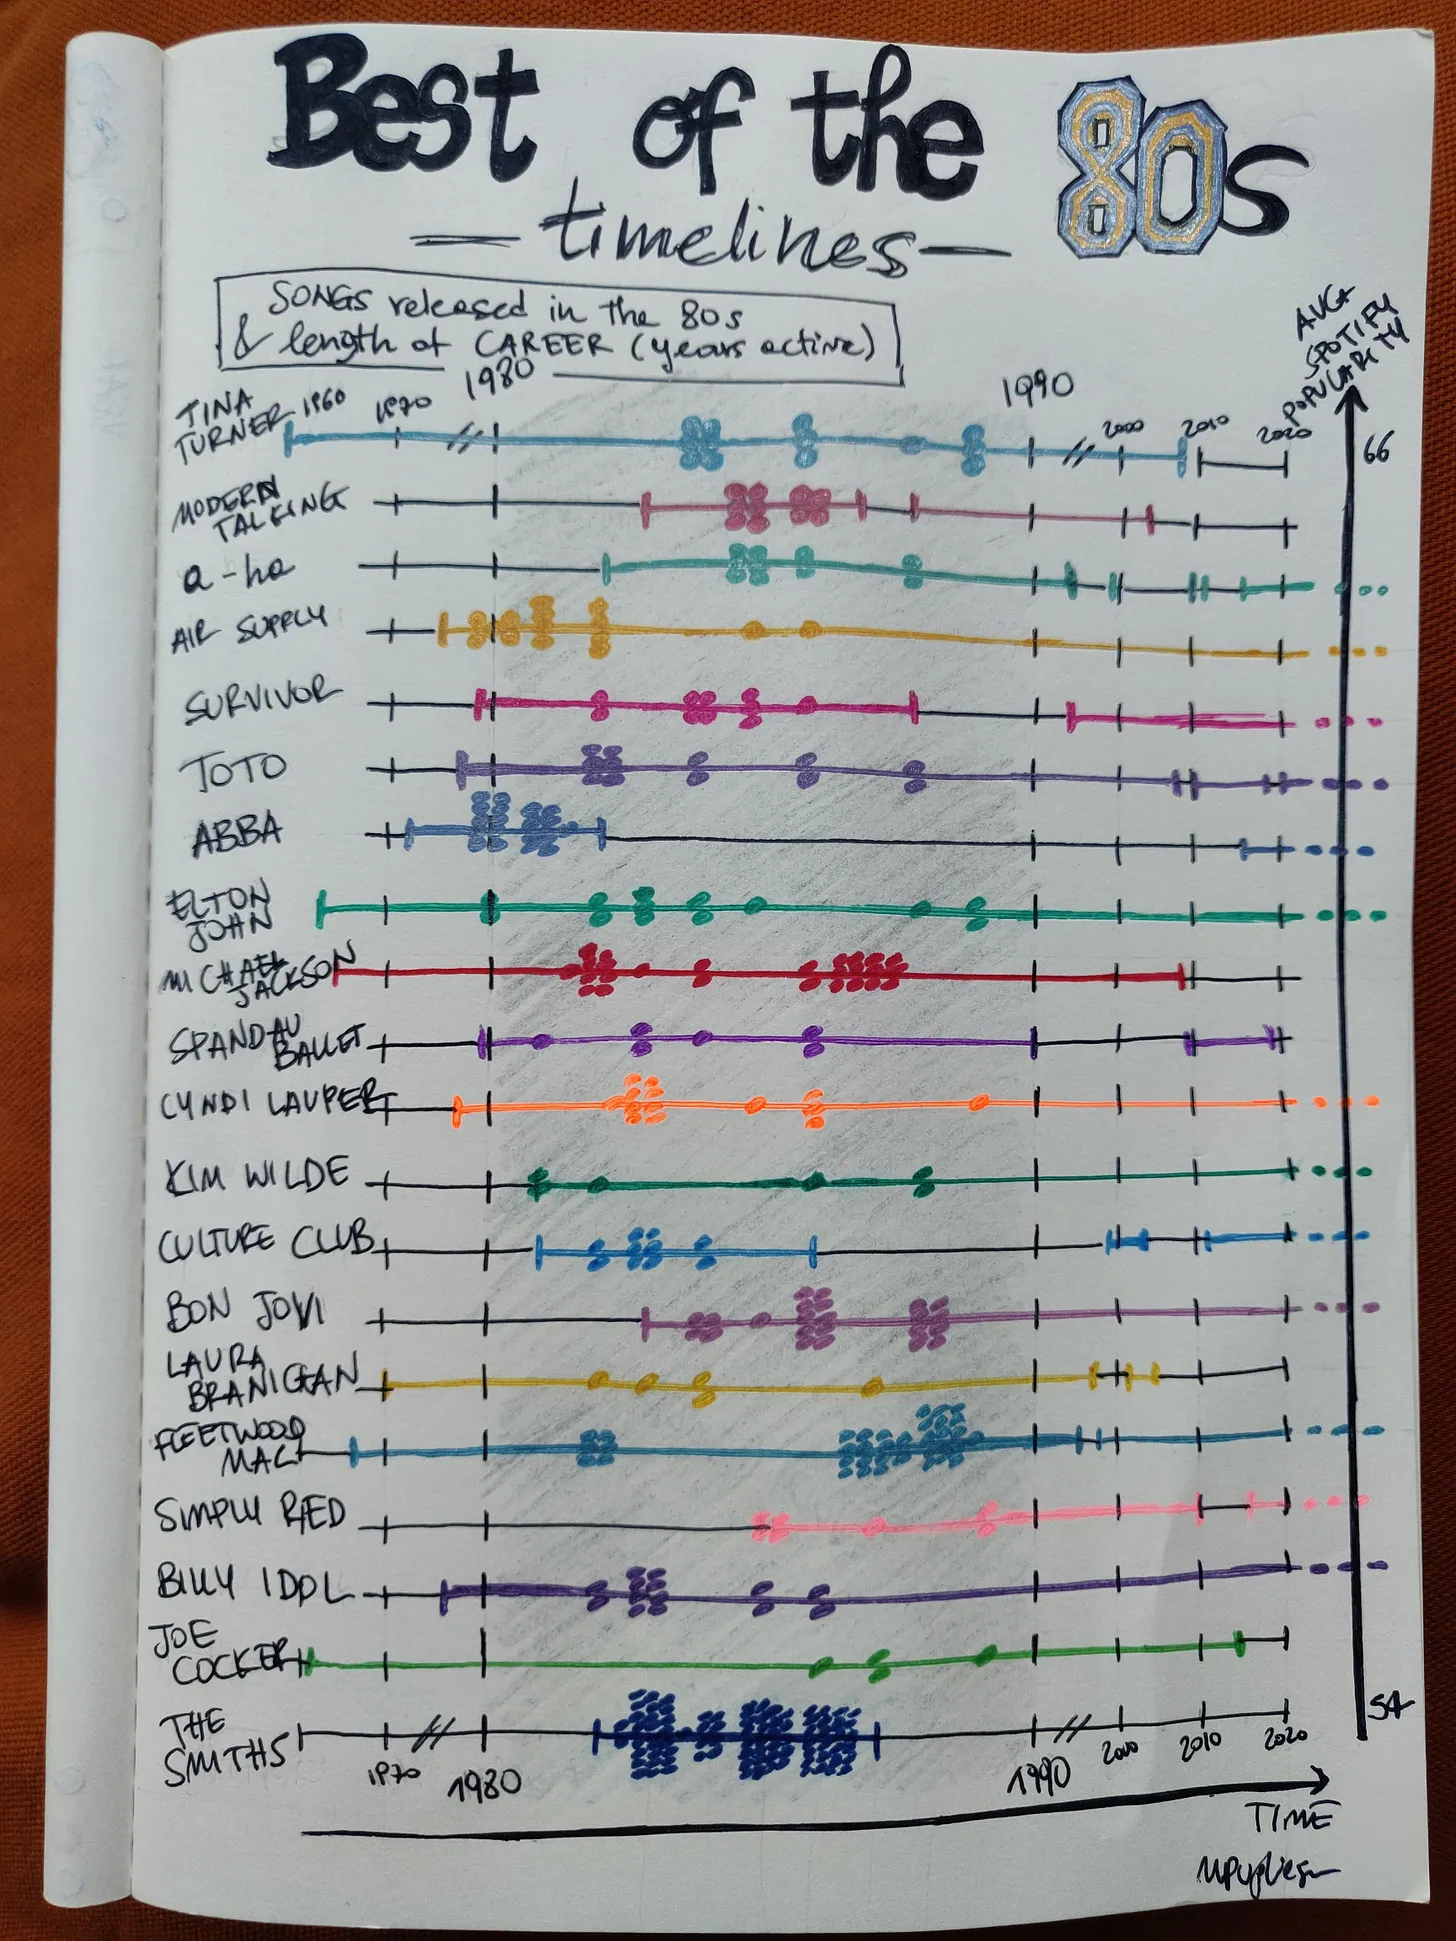 Hand-drawn timelines of some artists of the 80s and their best tracks.